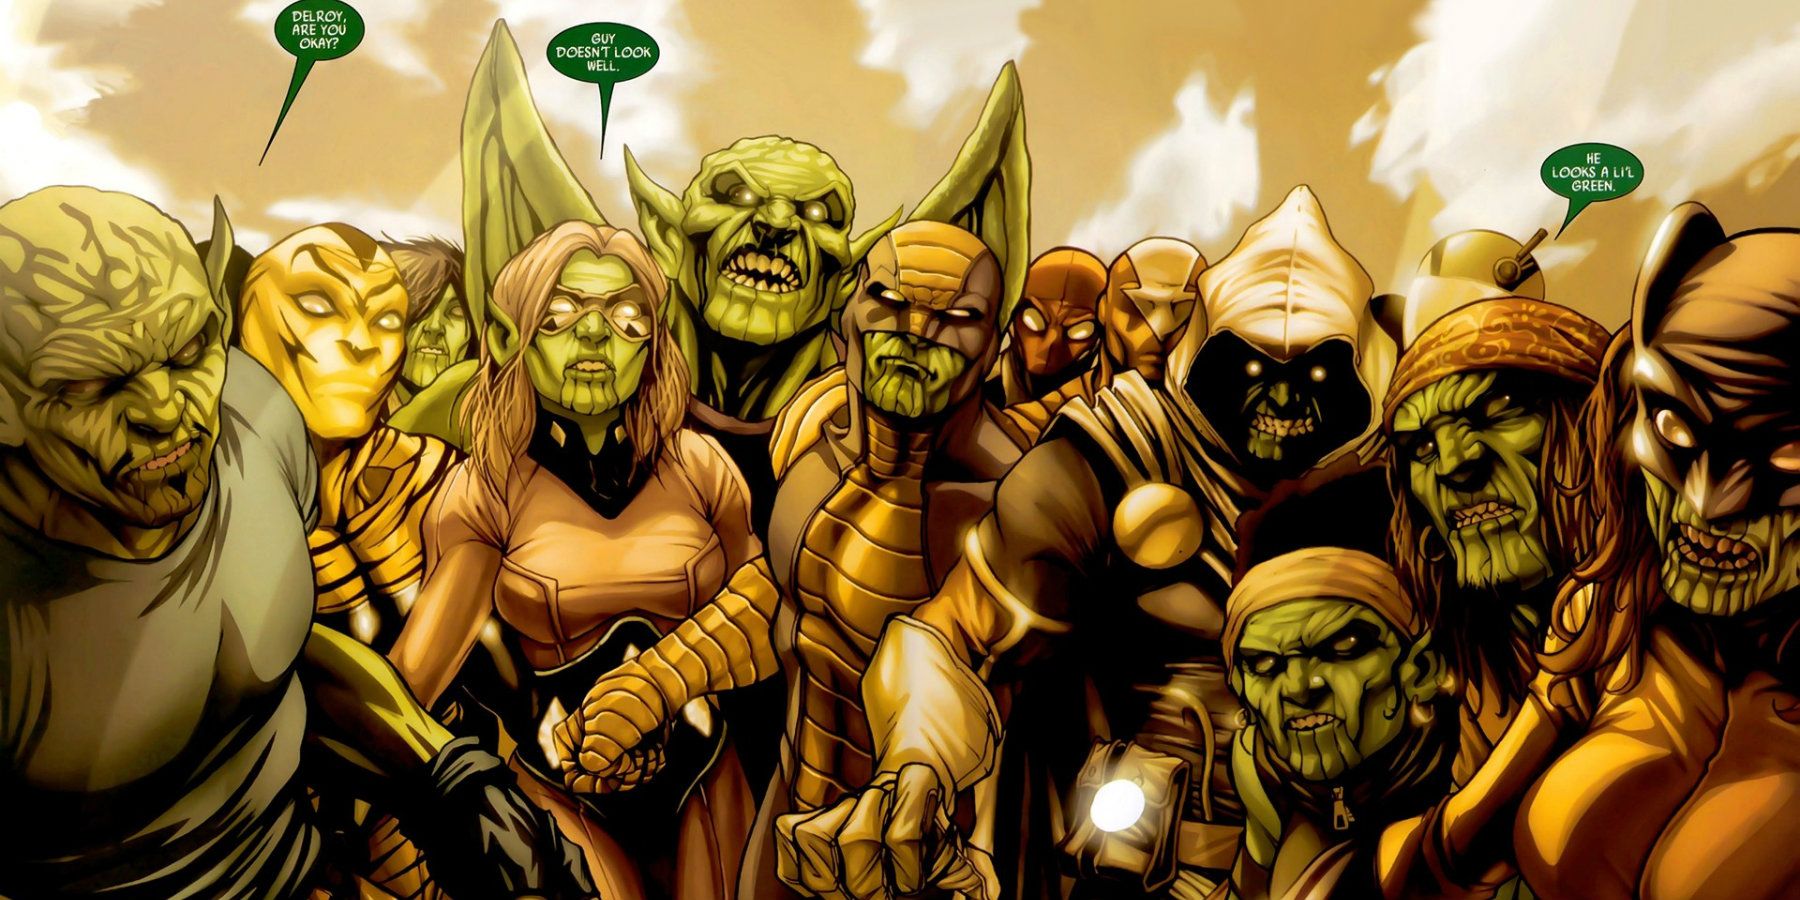 A group of Skrulls partially shapeshifting to look like Marvel heroes and villains